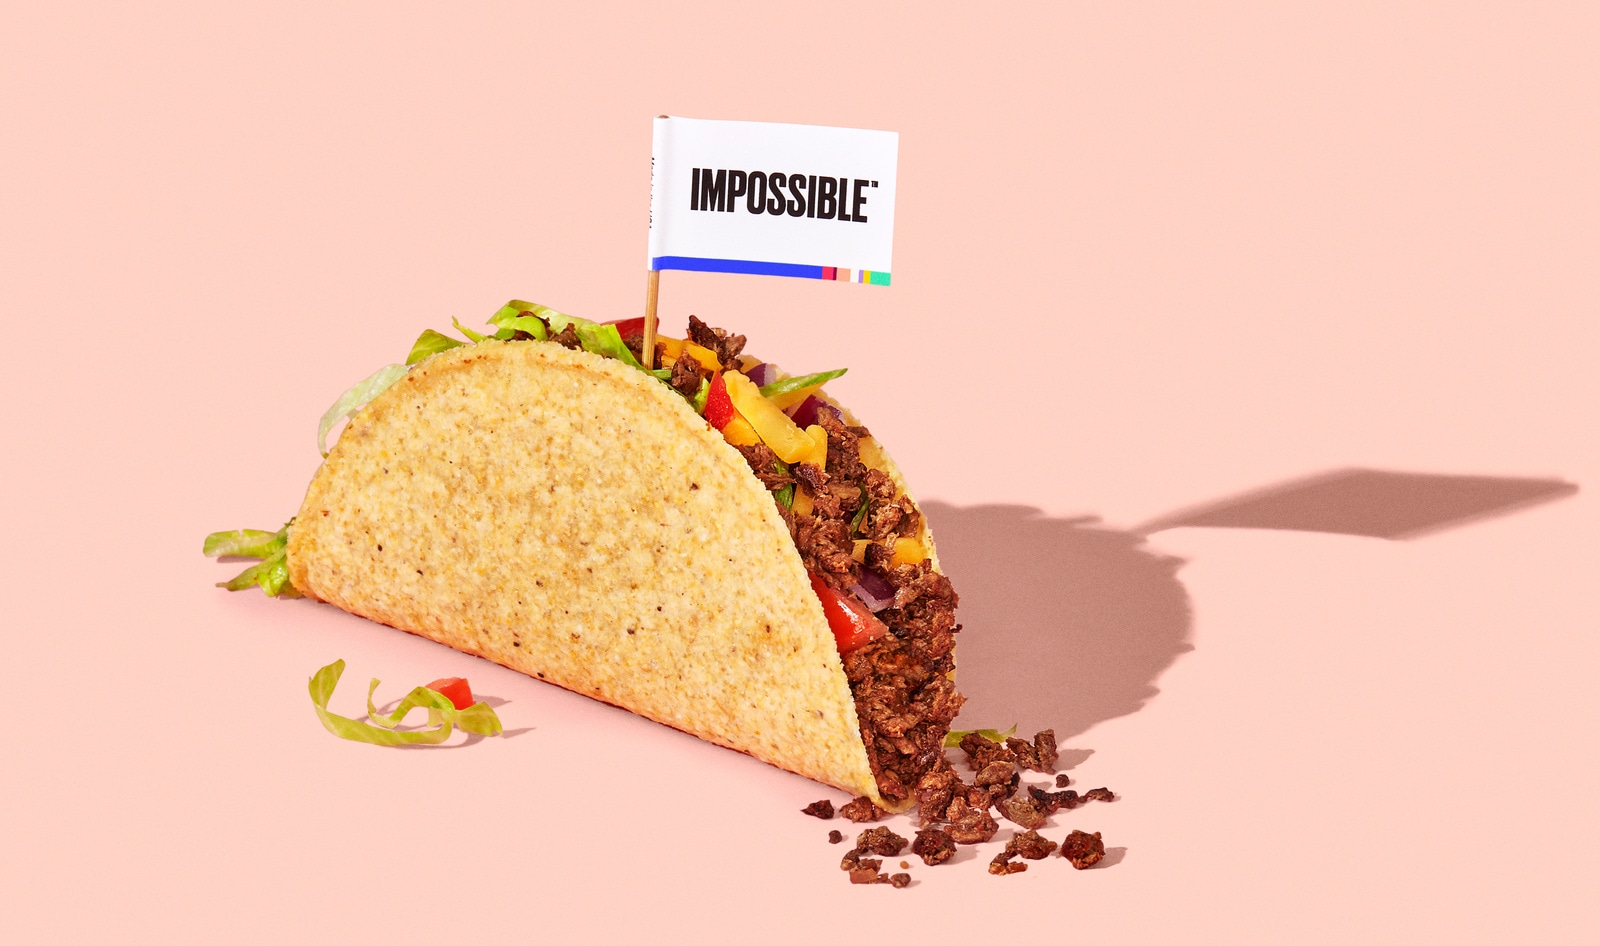 Impossible Foods Is Now Certified for School Lunches. Its Meatless Tacos and Spaghetti Are Coming to Cafeterias Nationwide